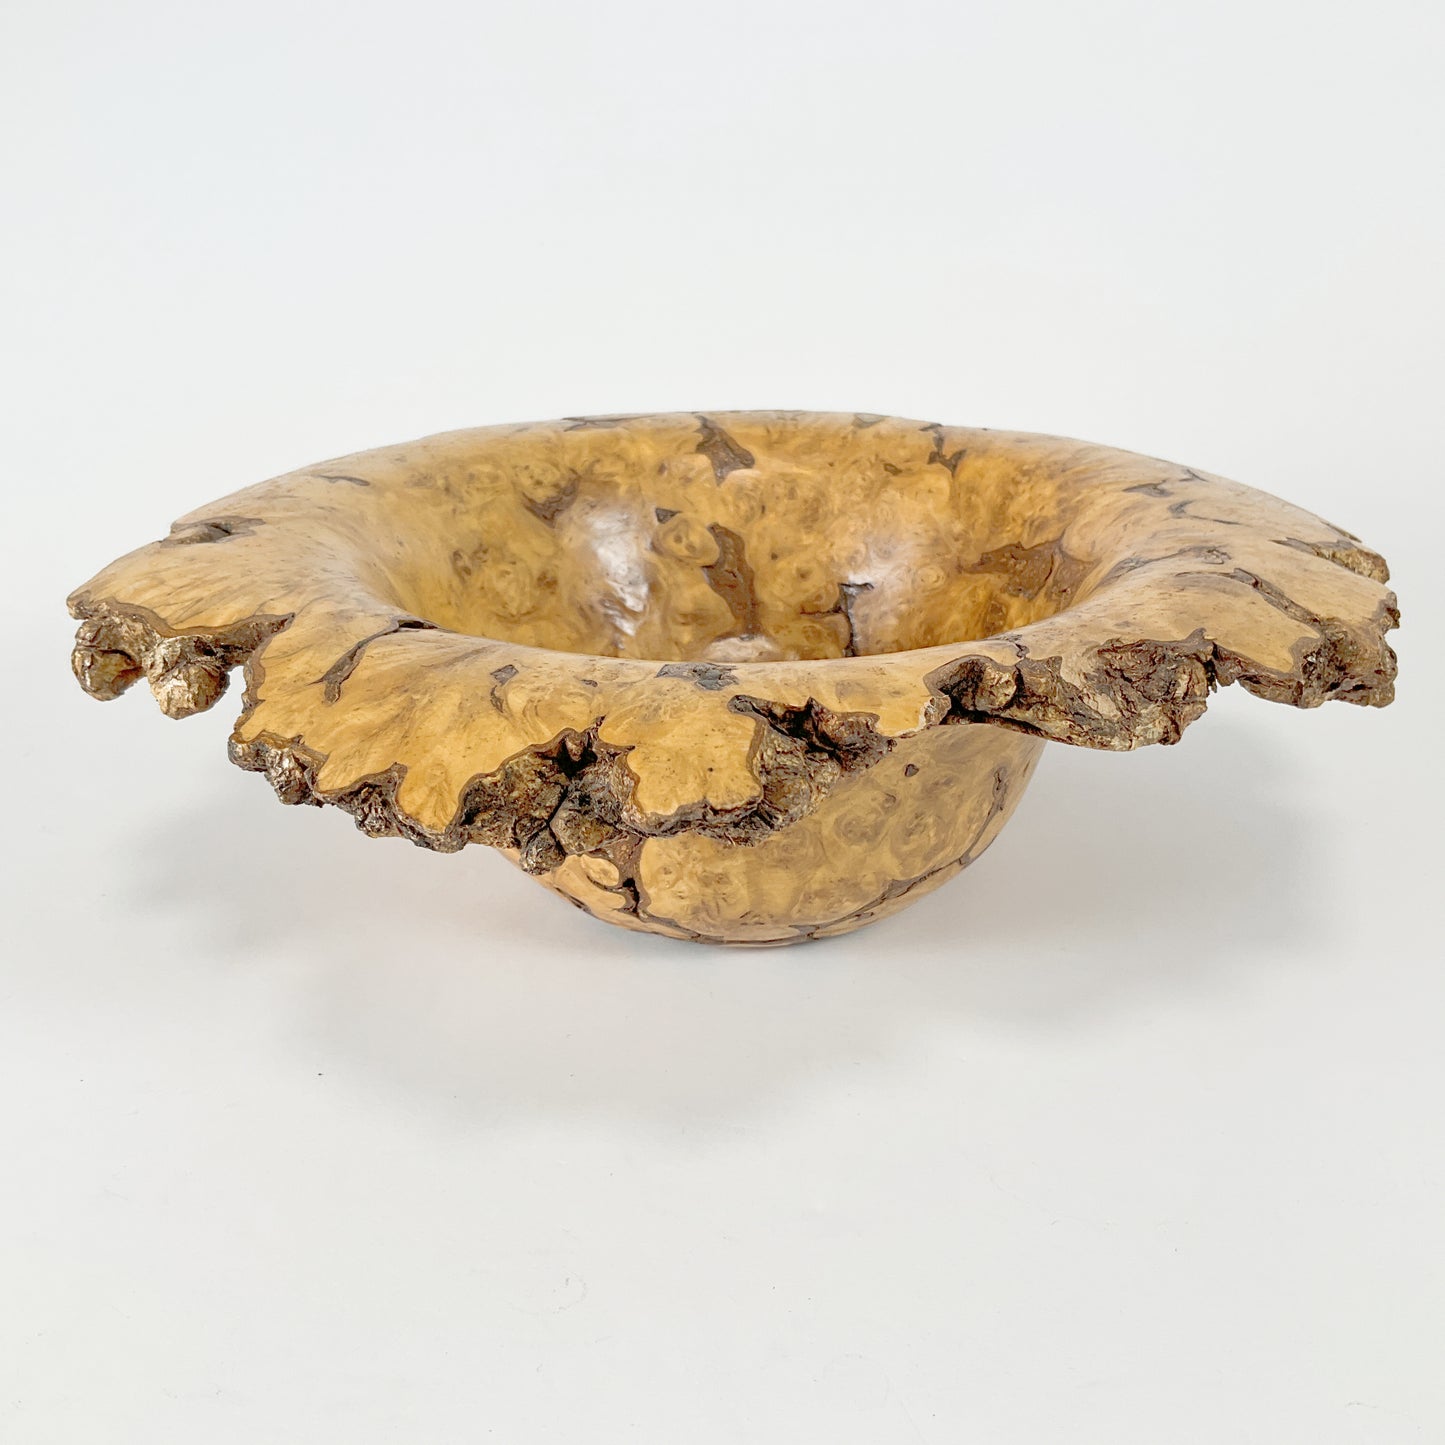 Handcrafted - Silver Beech Burl Bowl